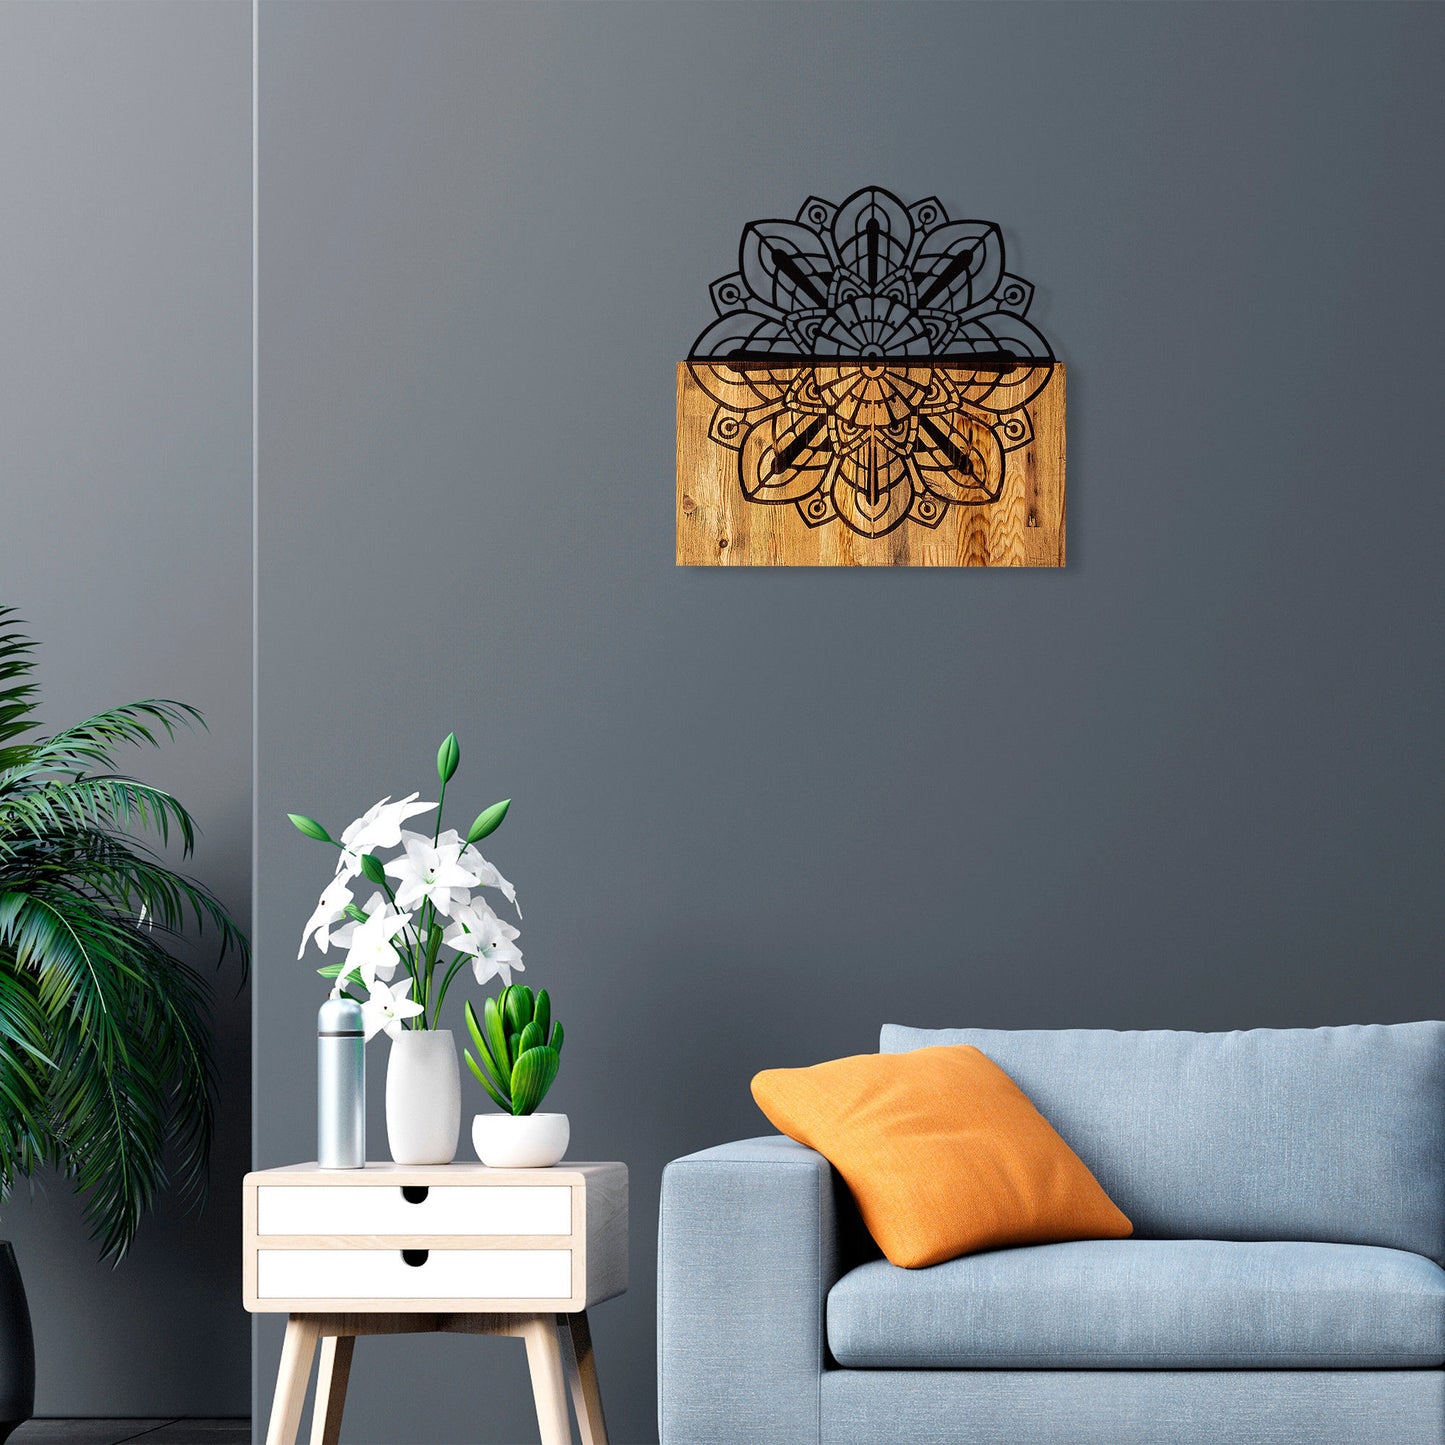 Typha - Decorative Wooden Wall Accessory